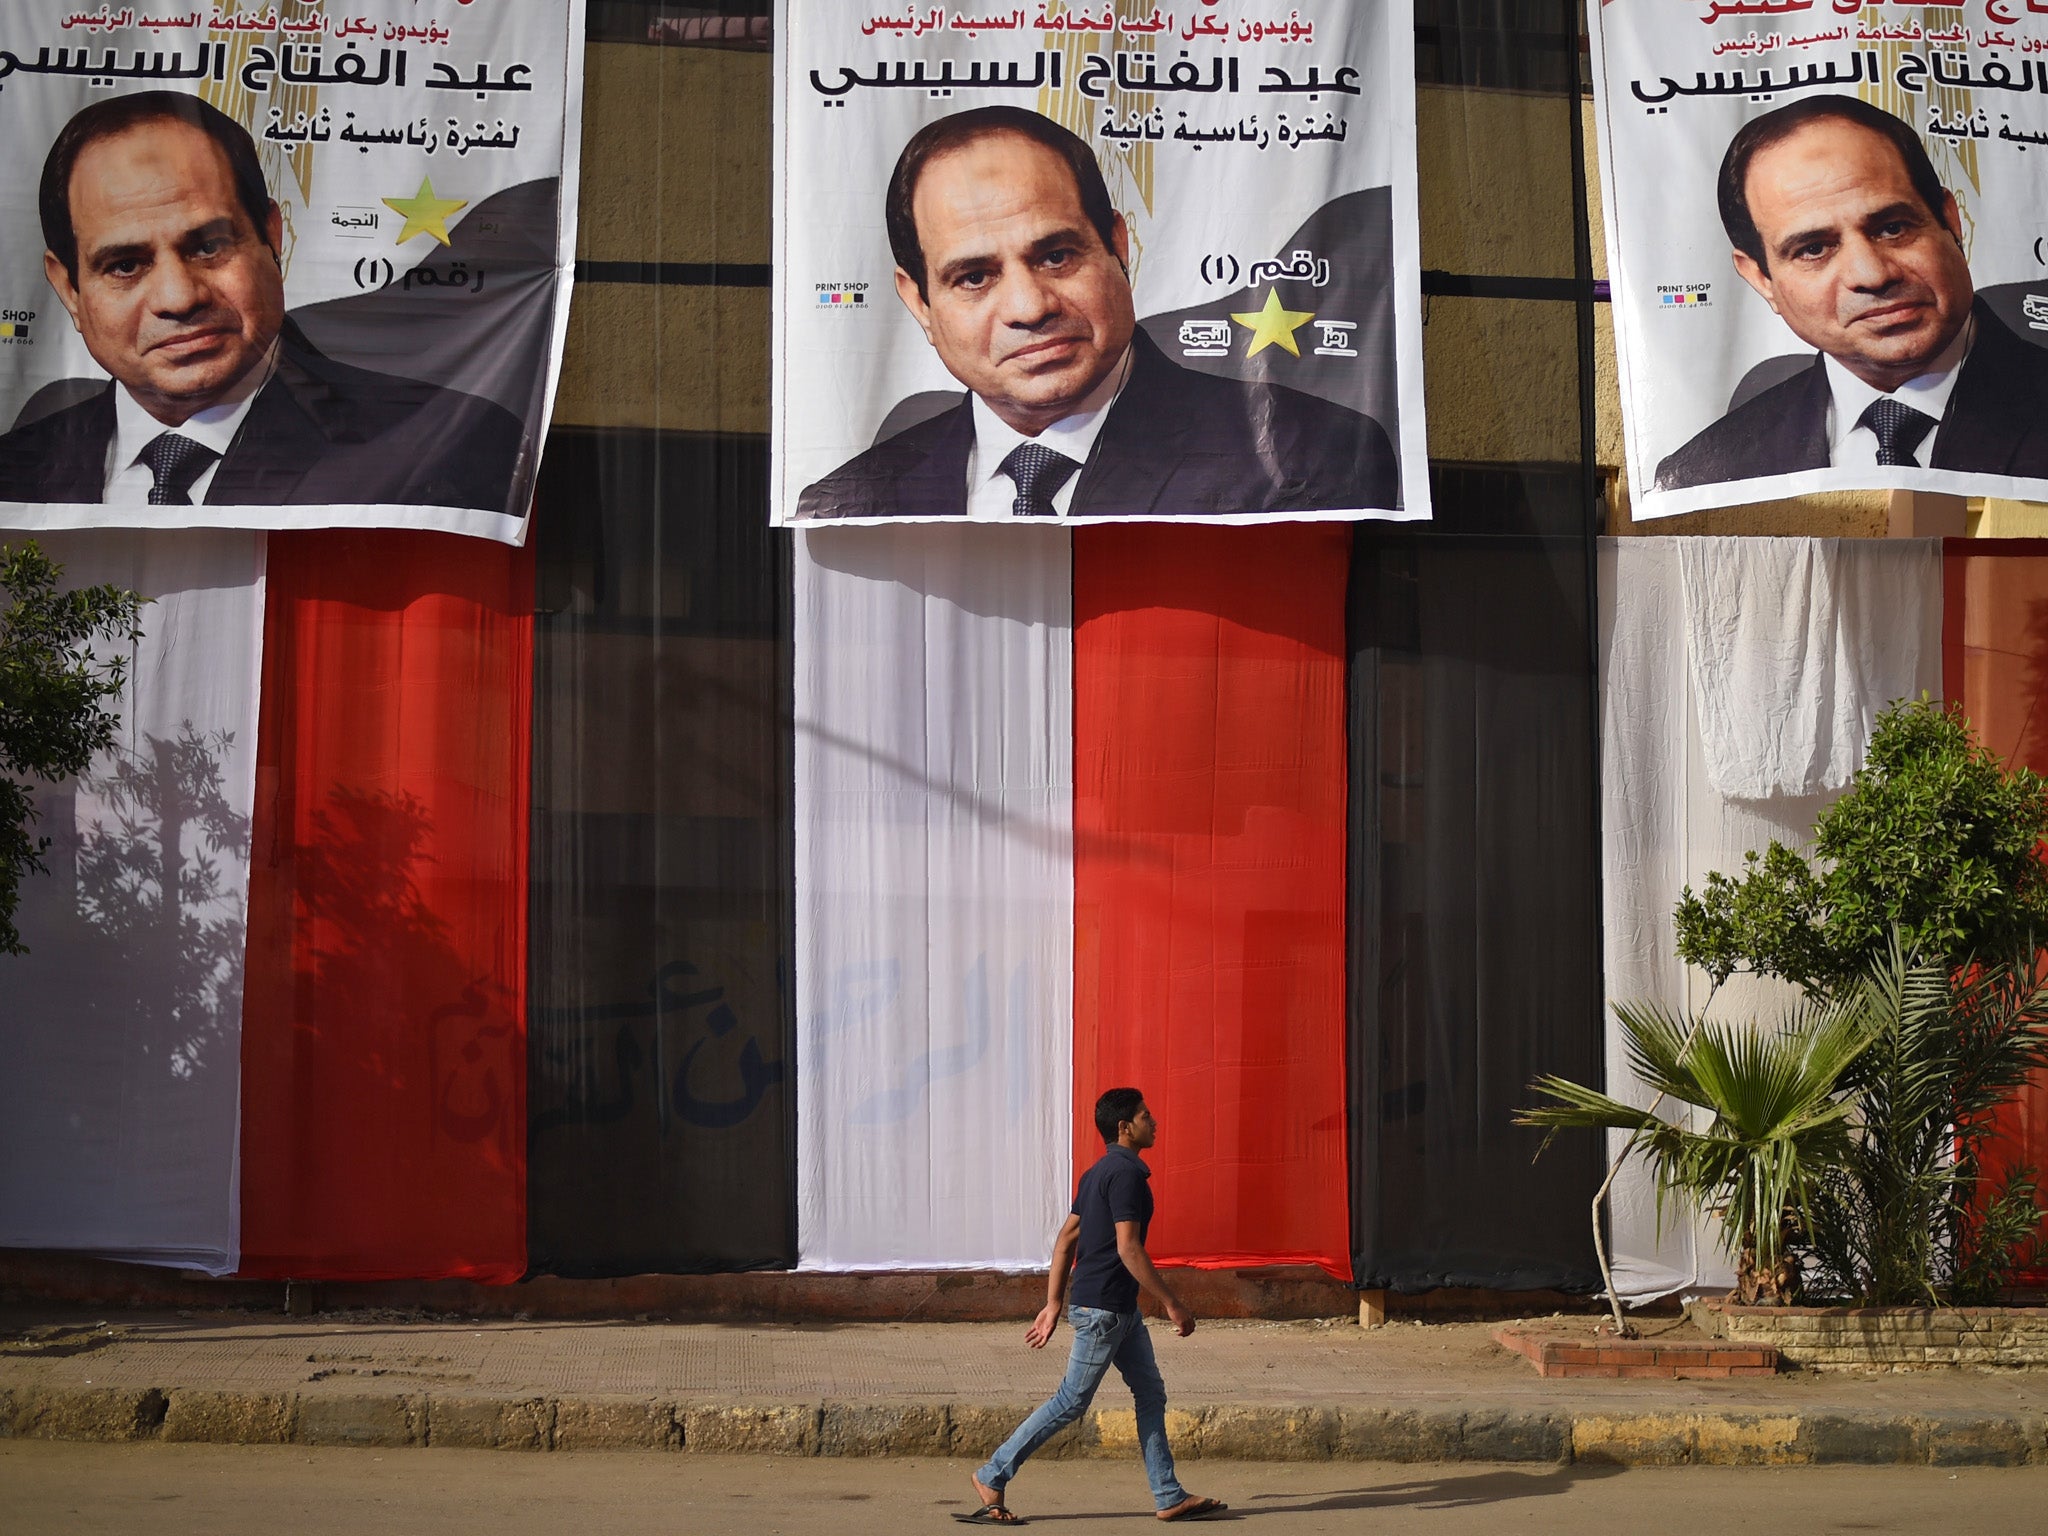 The Egyptian people, with an admittedly miserable turnout and an even more pathetic electoral opponent to Sisi, gave their beloved leader 97 per cent of their votes